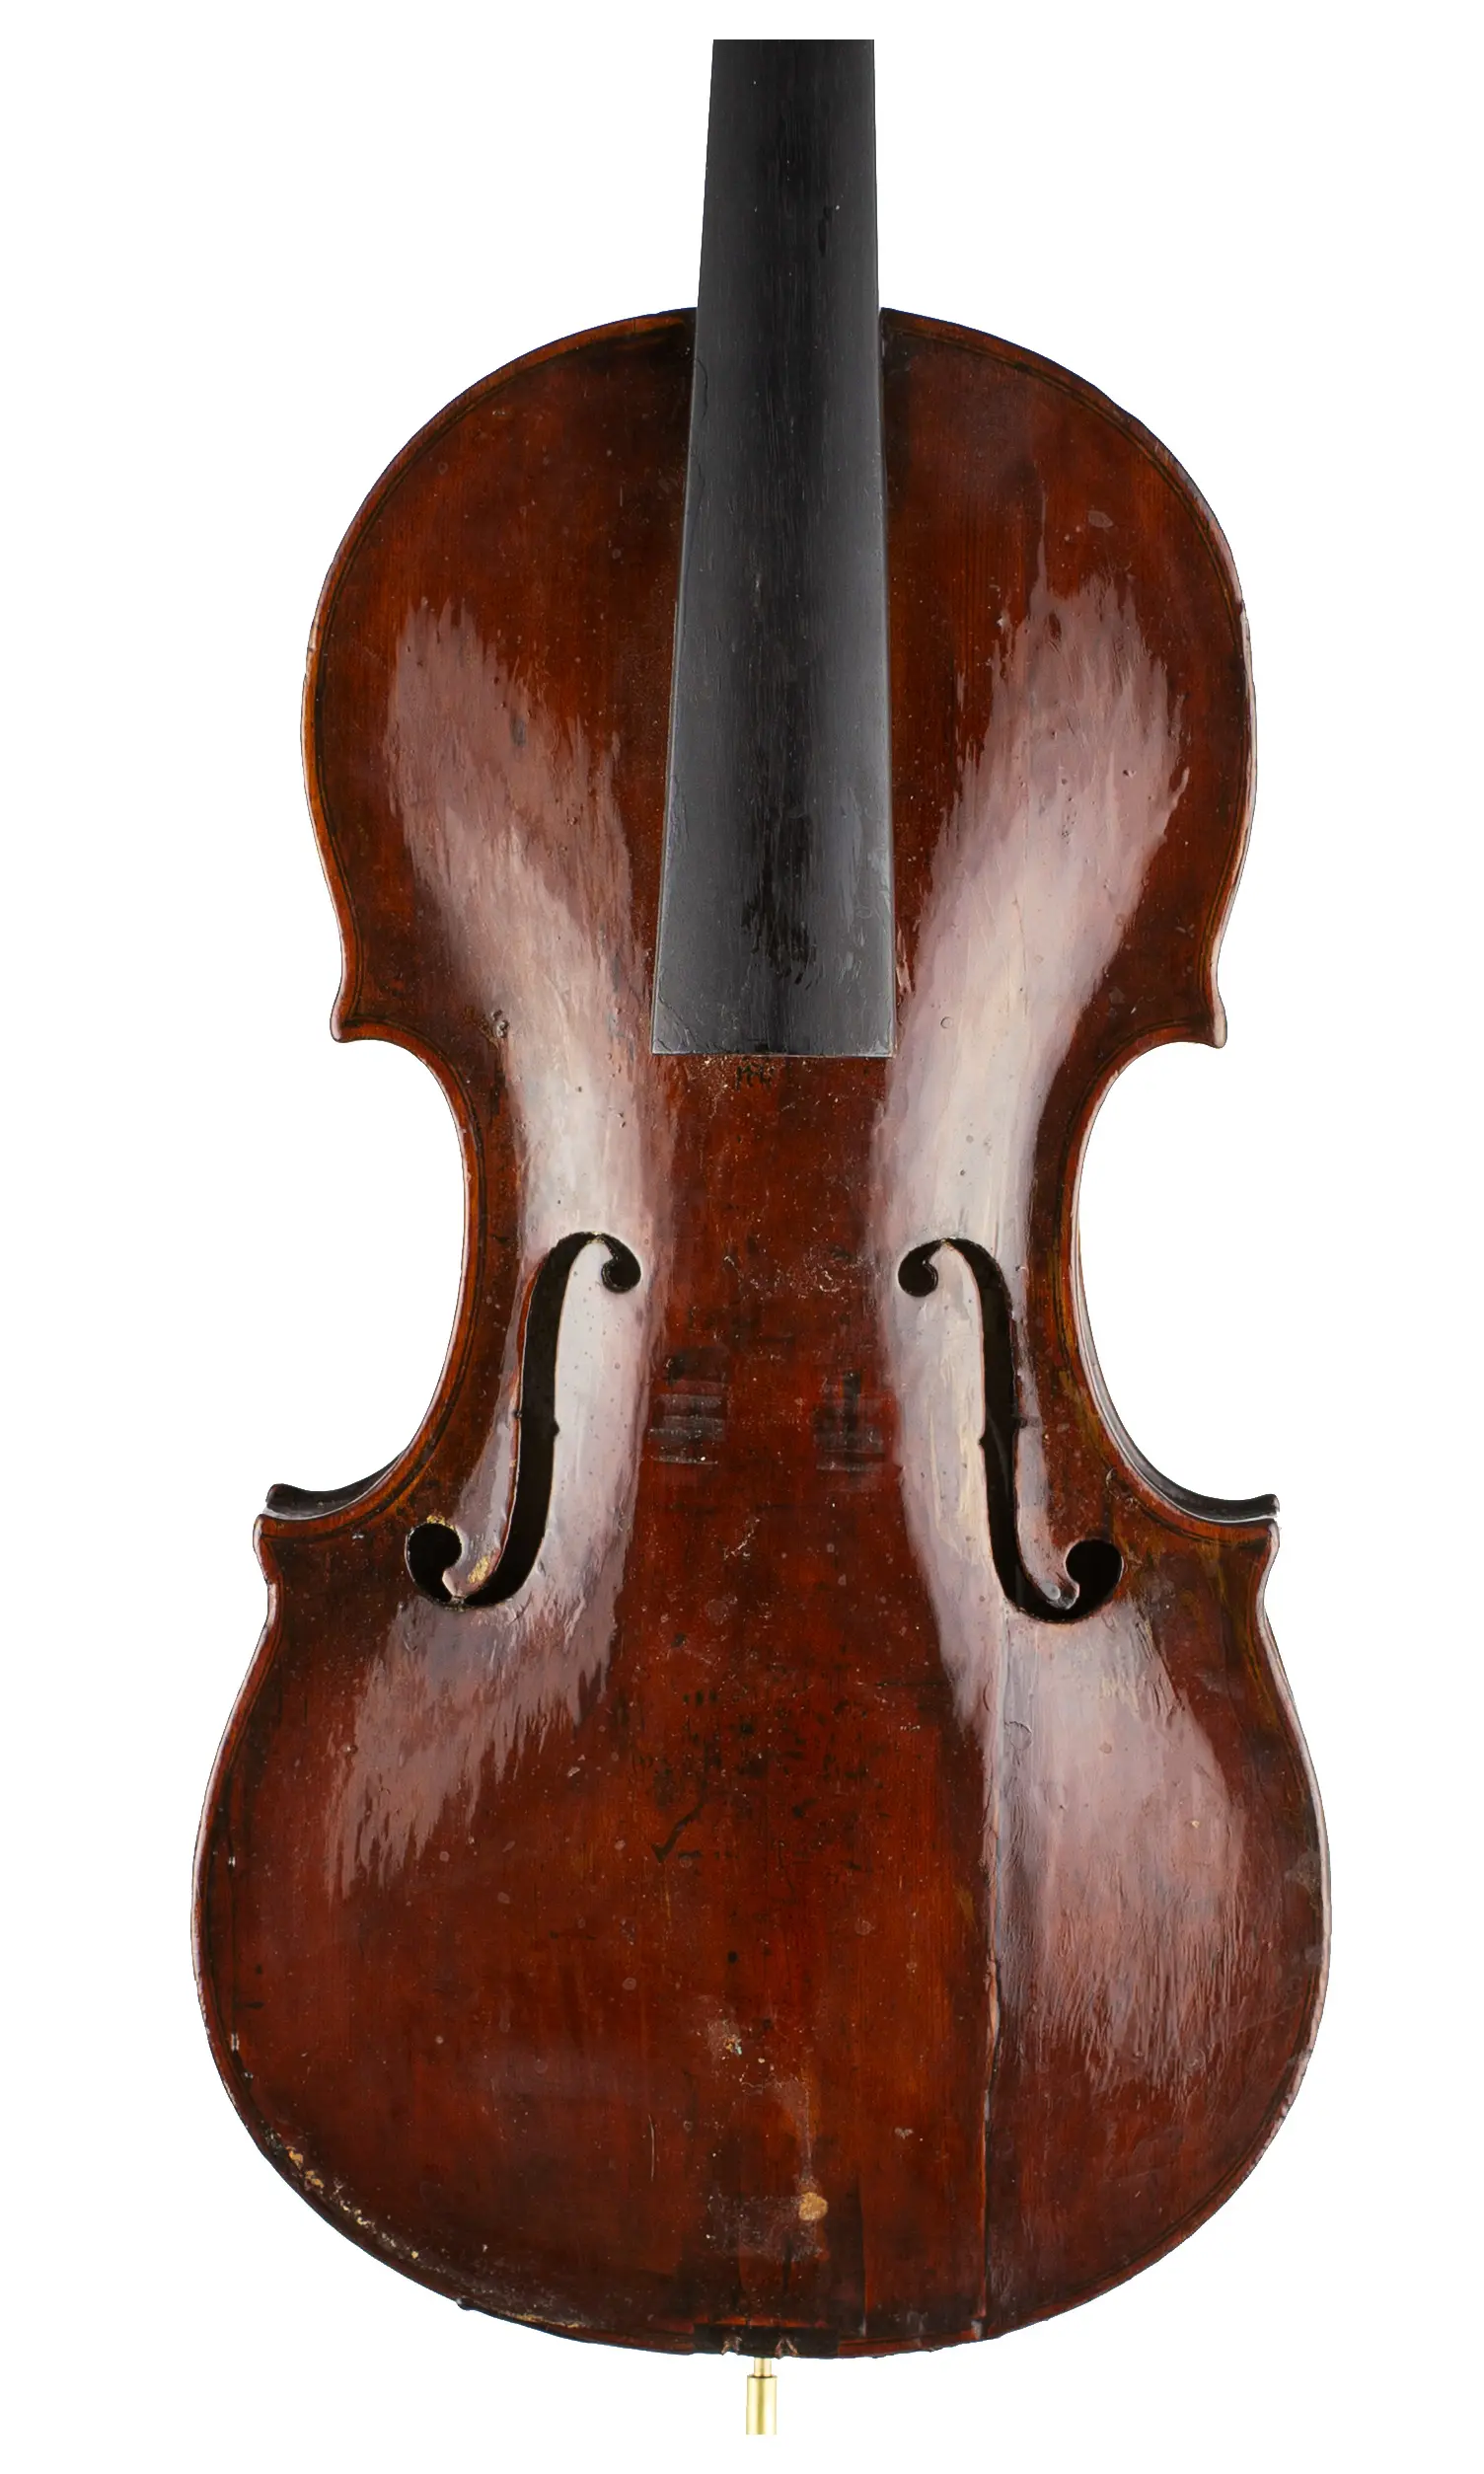 A violin, labelled Repaired by W. H. Falconer